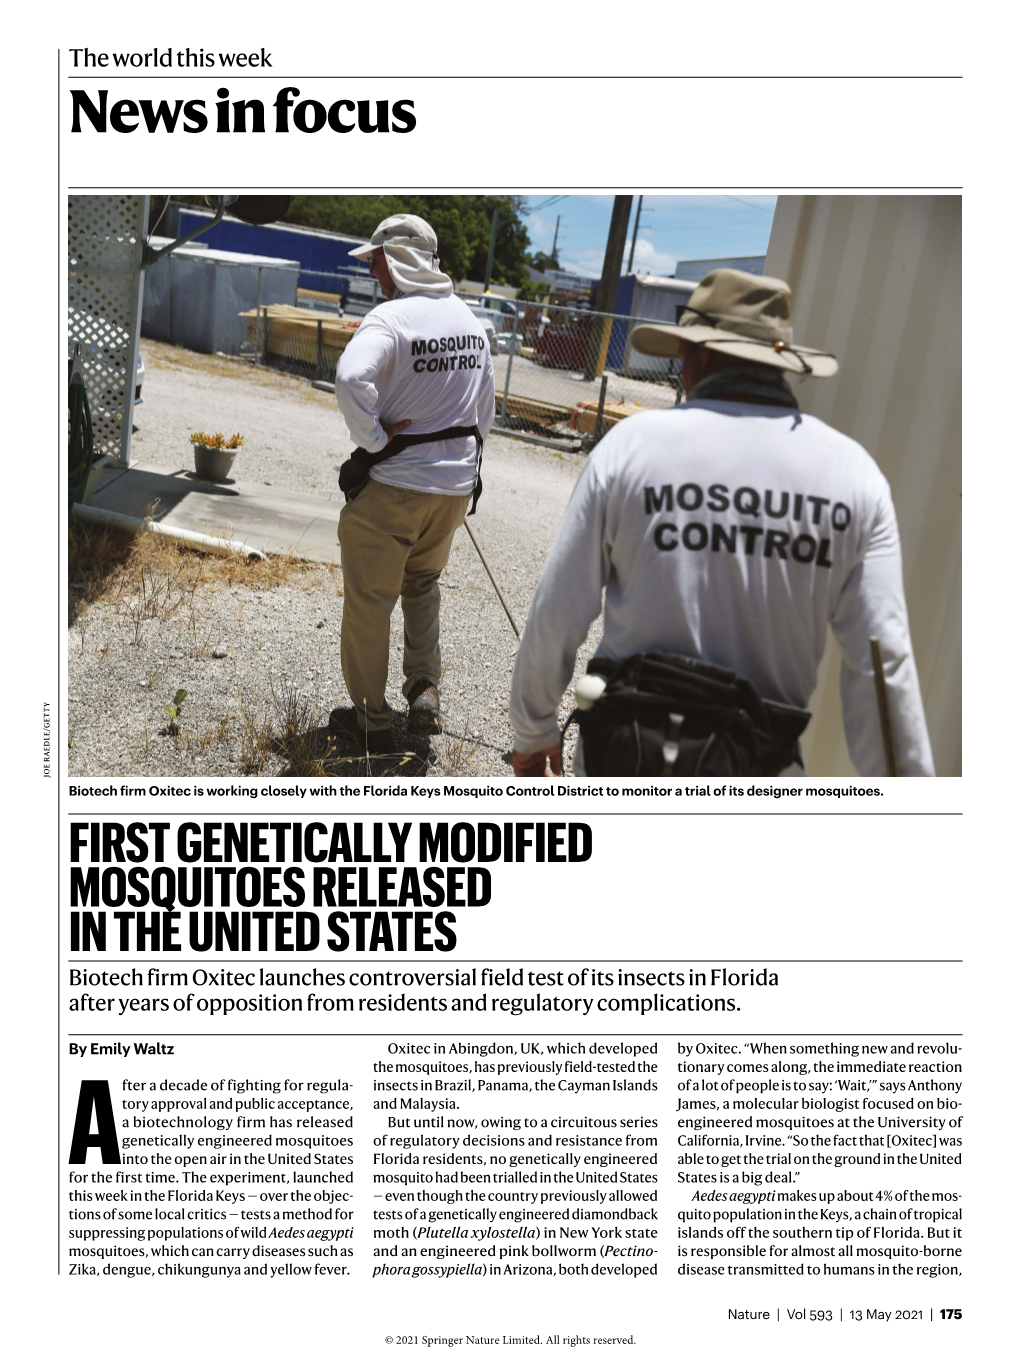 News in Focus JOE RAEDLE/GETTY Biotech Firm Oxitec Is Working Closely with the Florida Keys Mosquito Control District to Monitor a Trial of Its Designer Mosquitoes